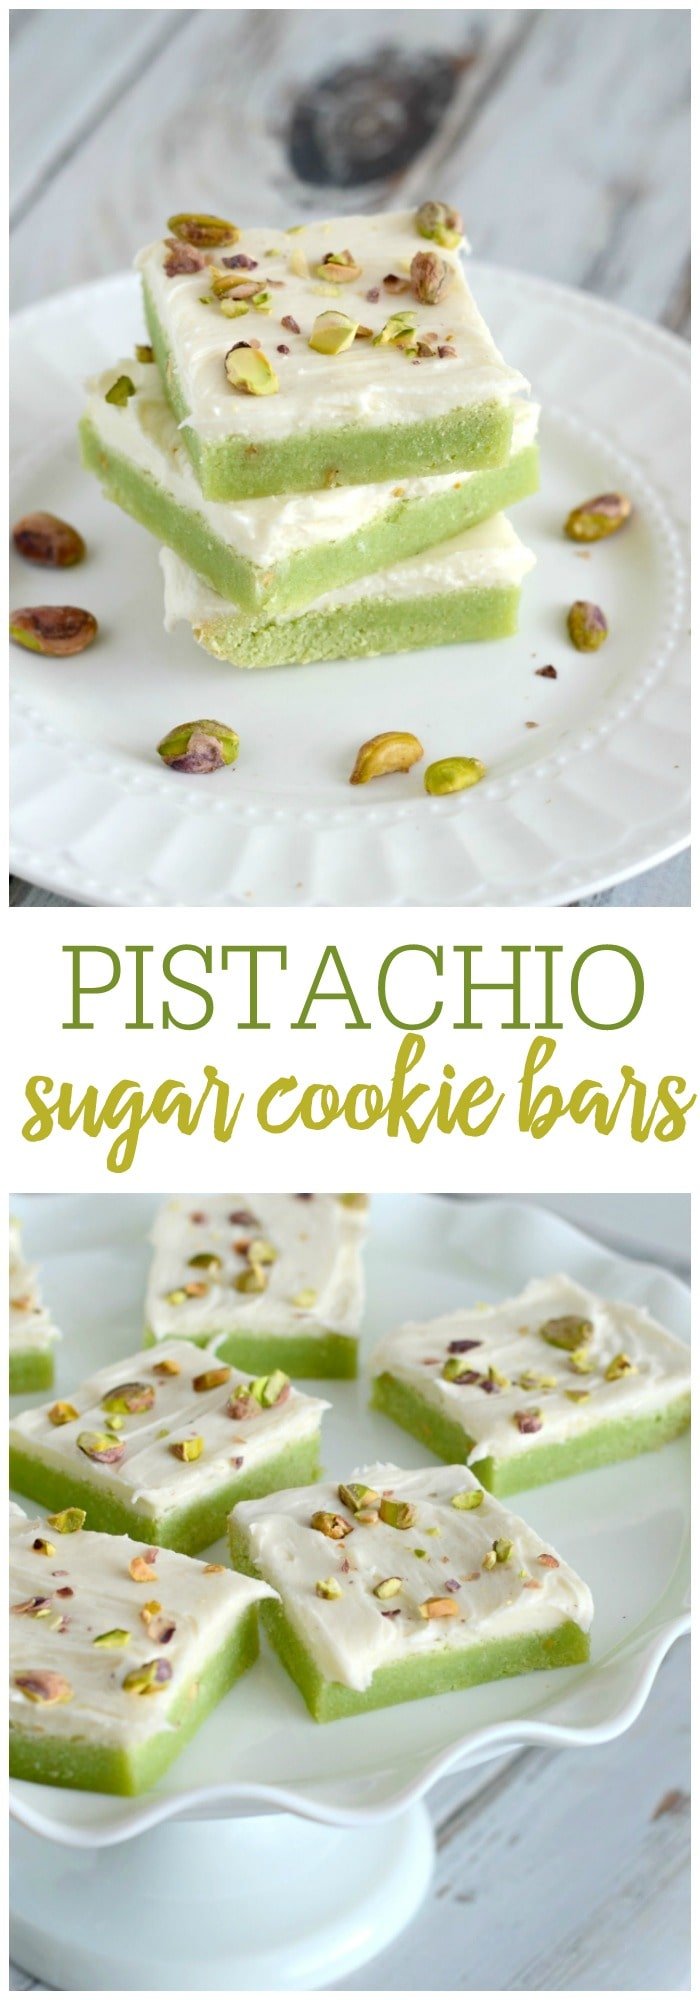 Soft and chewy pistachio sugar cookie bars with cream cheese frosting. These bars are easy to make, and taste simply amazing!